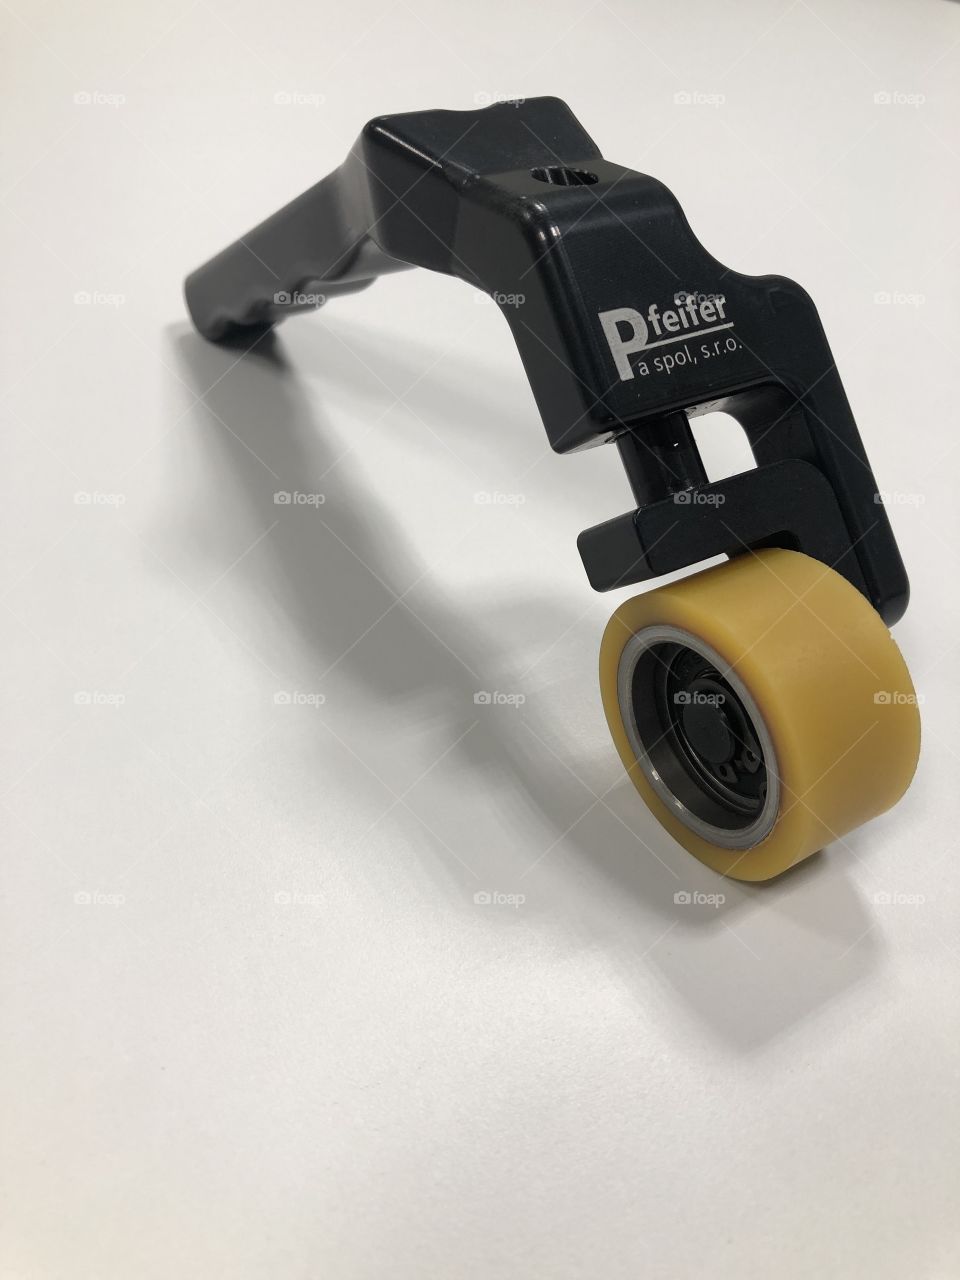 newly developed pressure roller for activating adhesive tapes by pressure